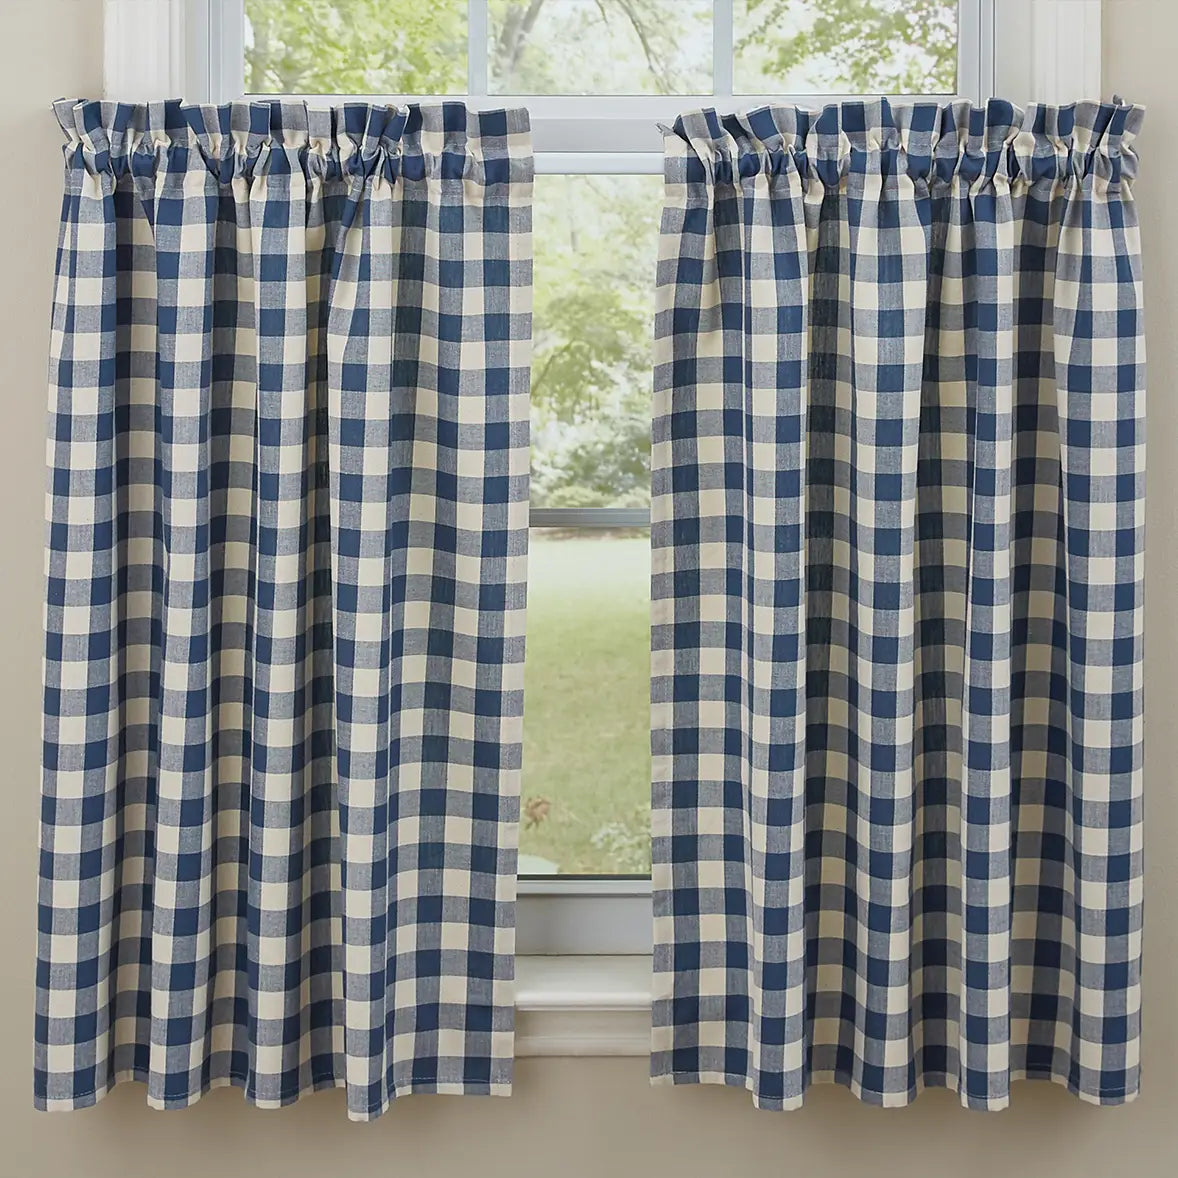 Dress up any window in cozy cottage charm with the York Blue Buffalo Check Cafe Curtains. With serene country blue and cream large-scale checks, this farmhouse curtain tier set updates your home decor with a lighthearted country feel. Whether you're going for a coastal, cottage our country look, these 100% cotton cafe curtains add the perfect combination of simplicity and elegance .&nbsp; Set of two tiers. Each is 36"L x 24"H